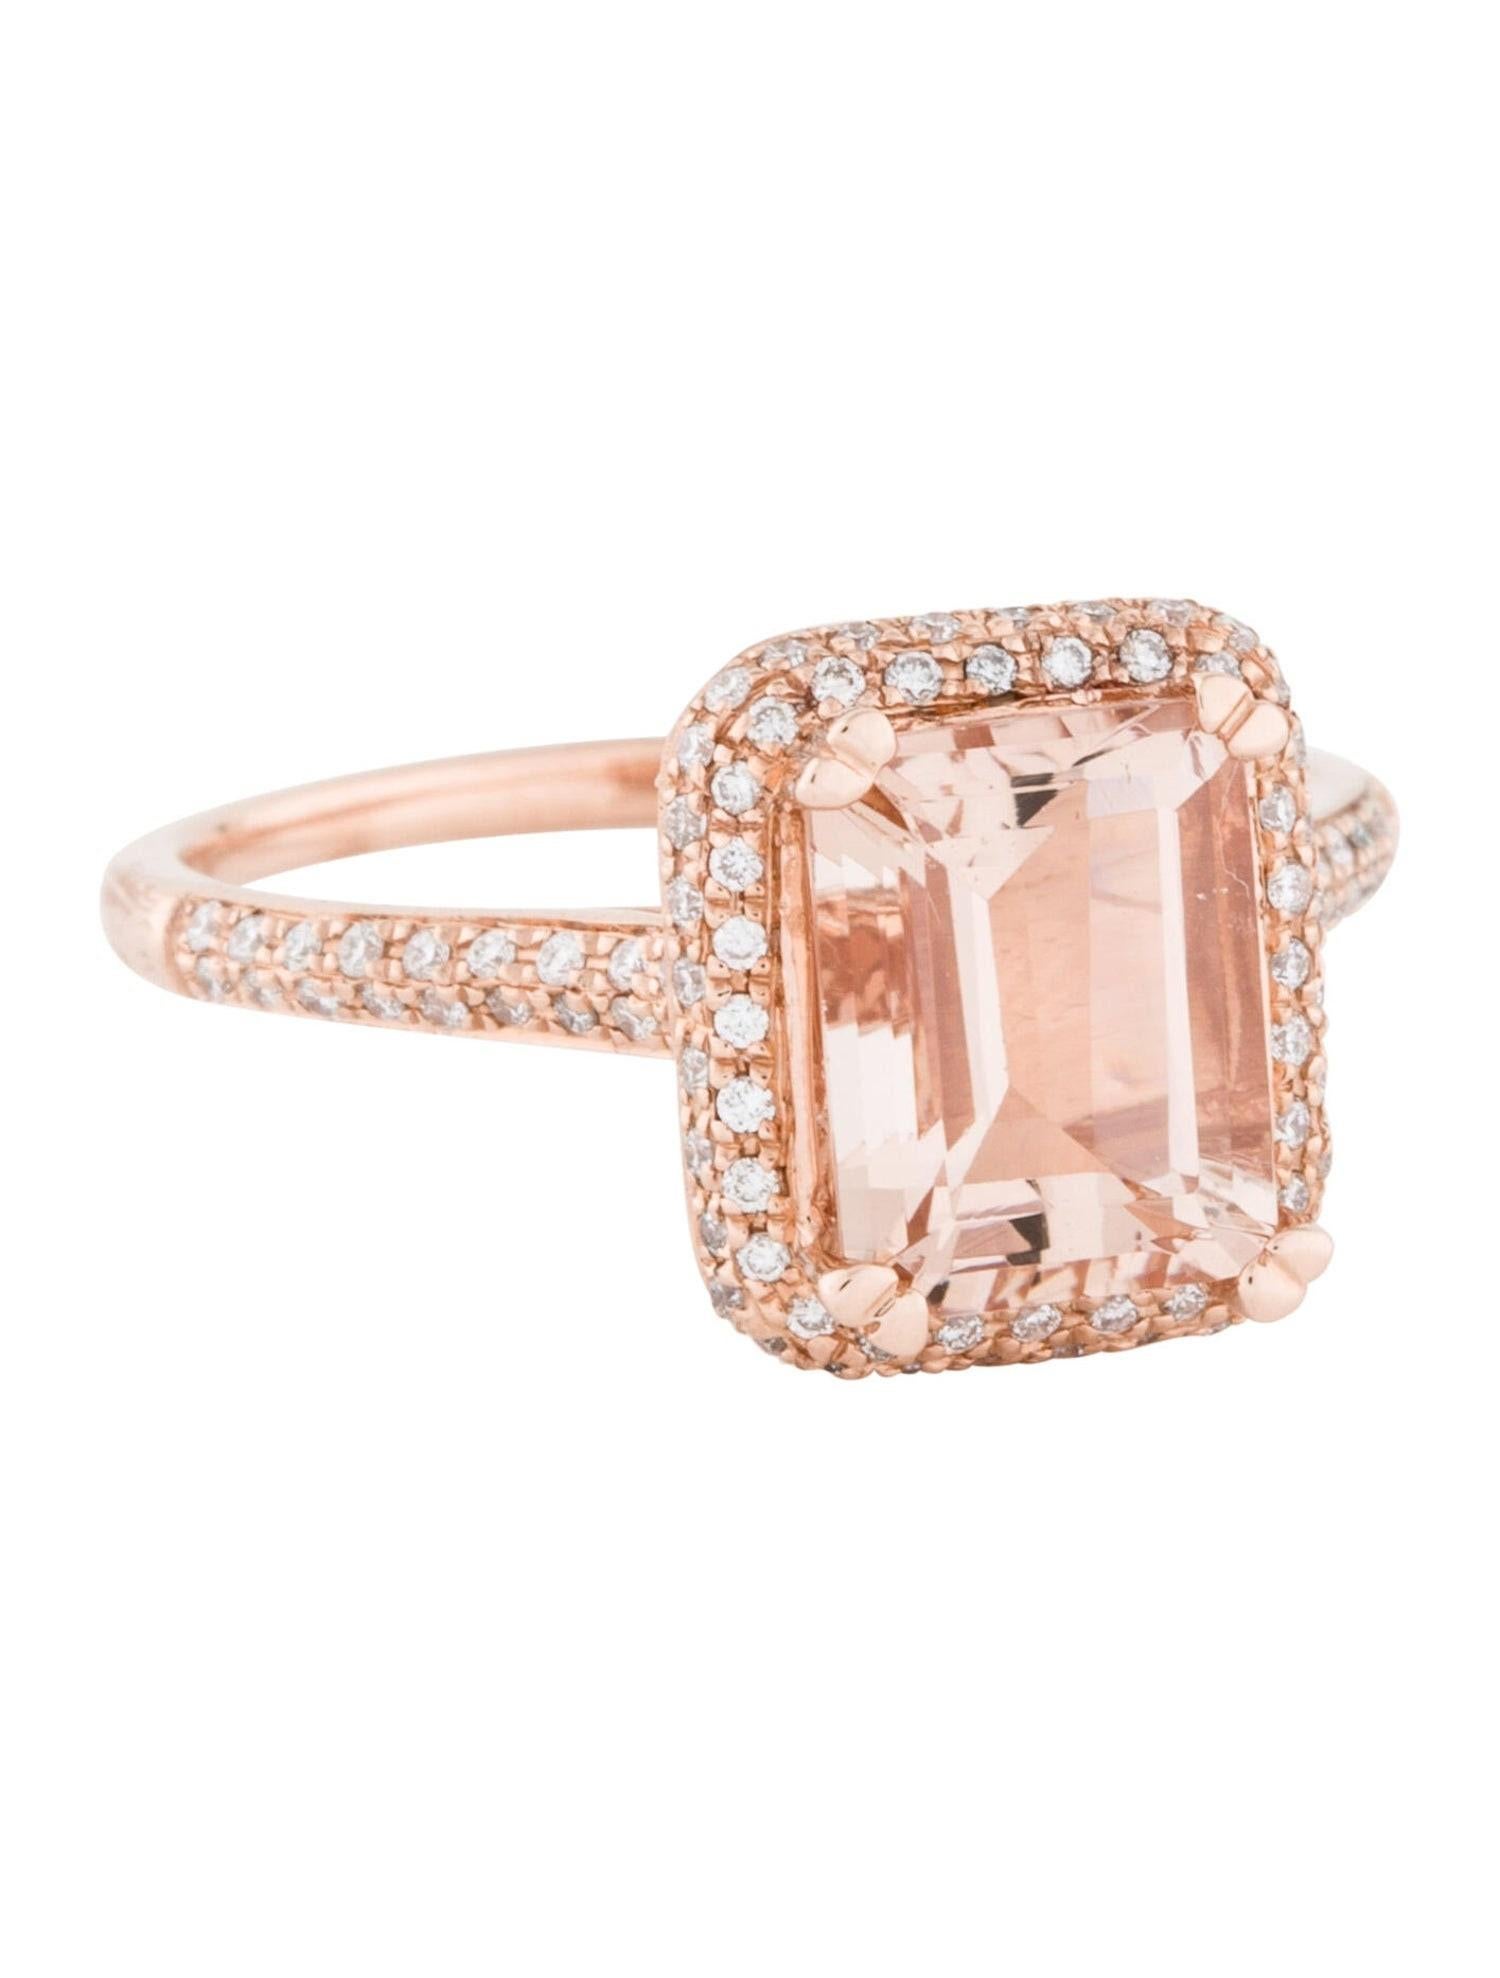 This is a stunning emerald cut natural morganite and diamond ring set in solid 14K rose gold. This ring features a natural emerald cut 2.06carat morganite stone with excellent clear color (AAA quality gem) surrounded by bright round diamonds.